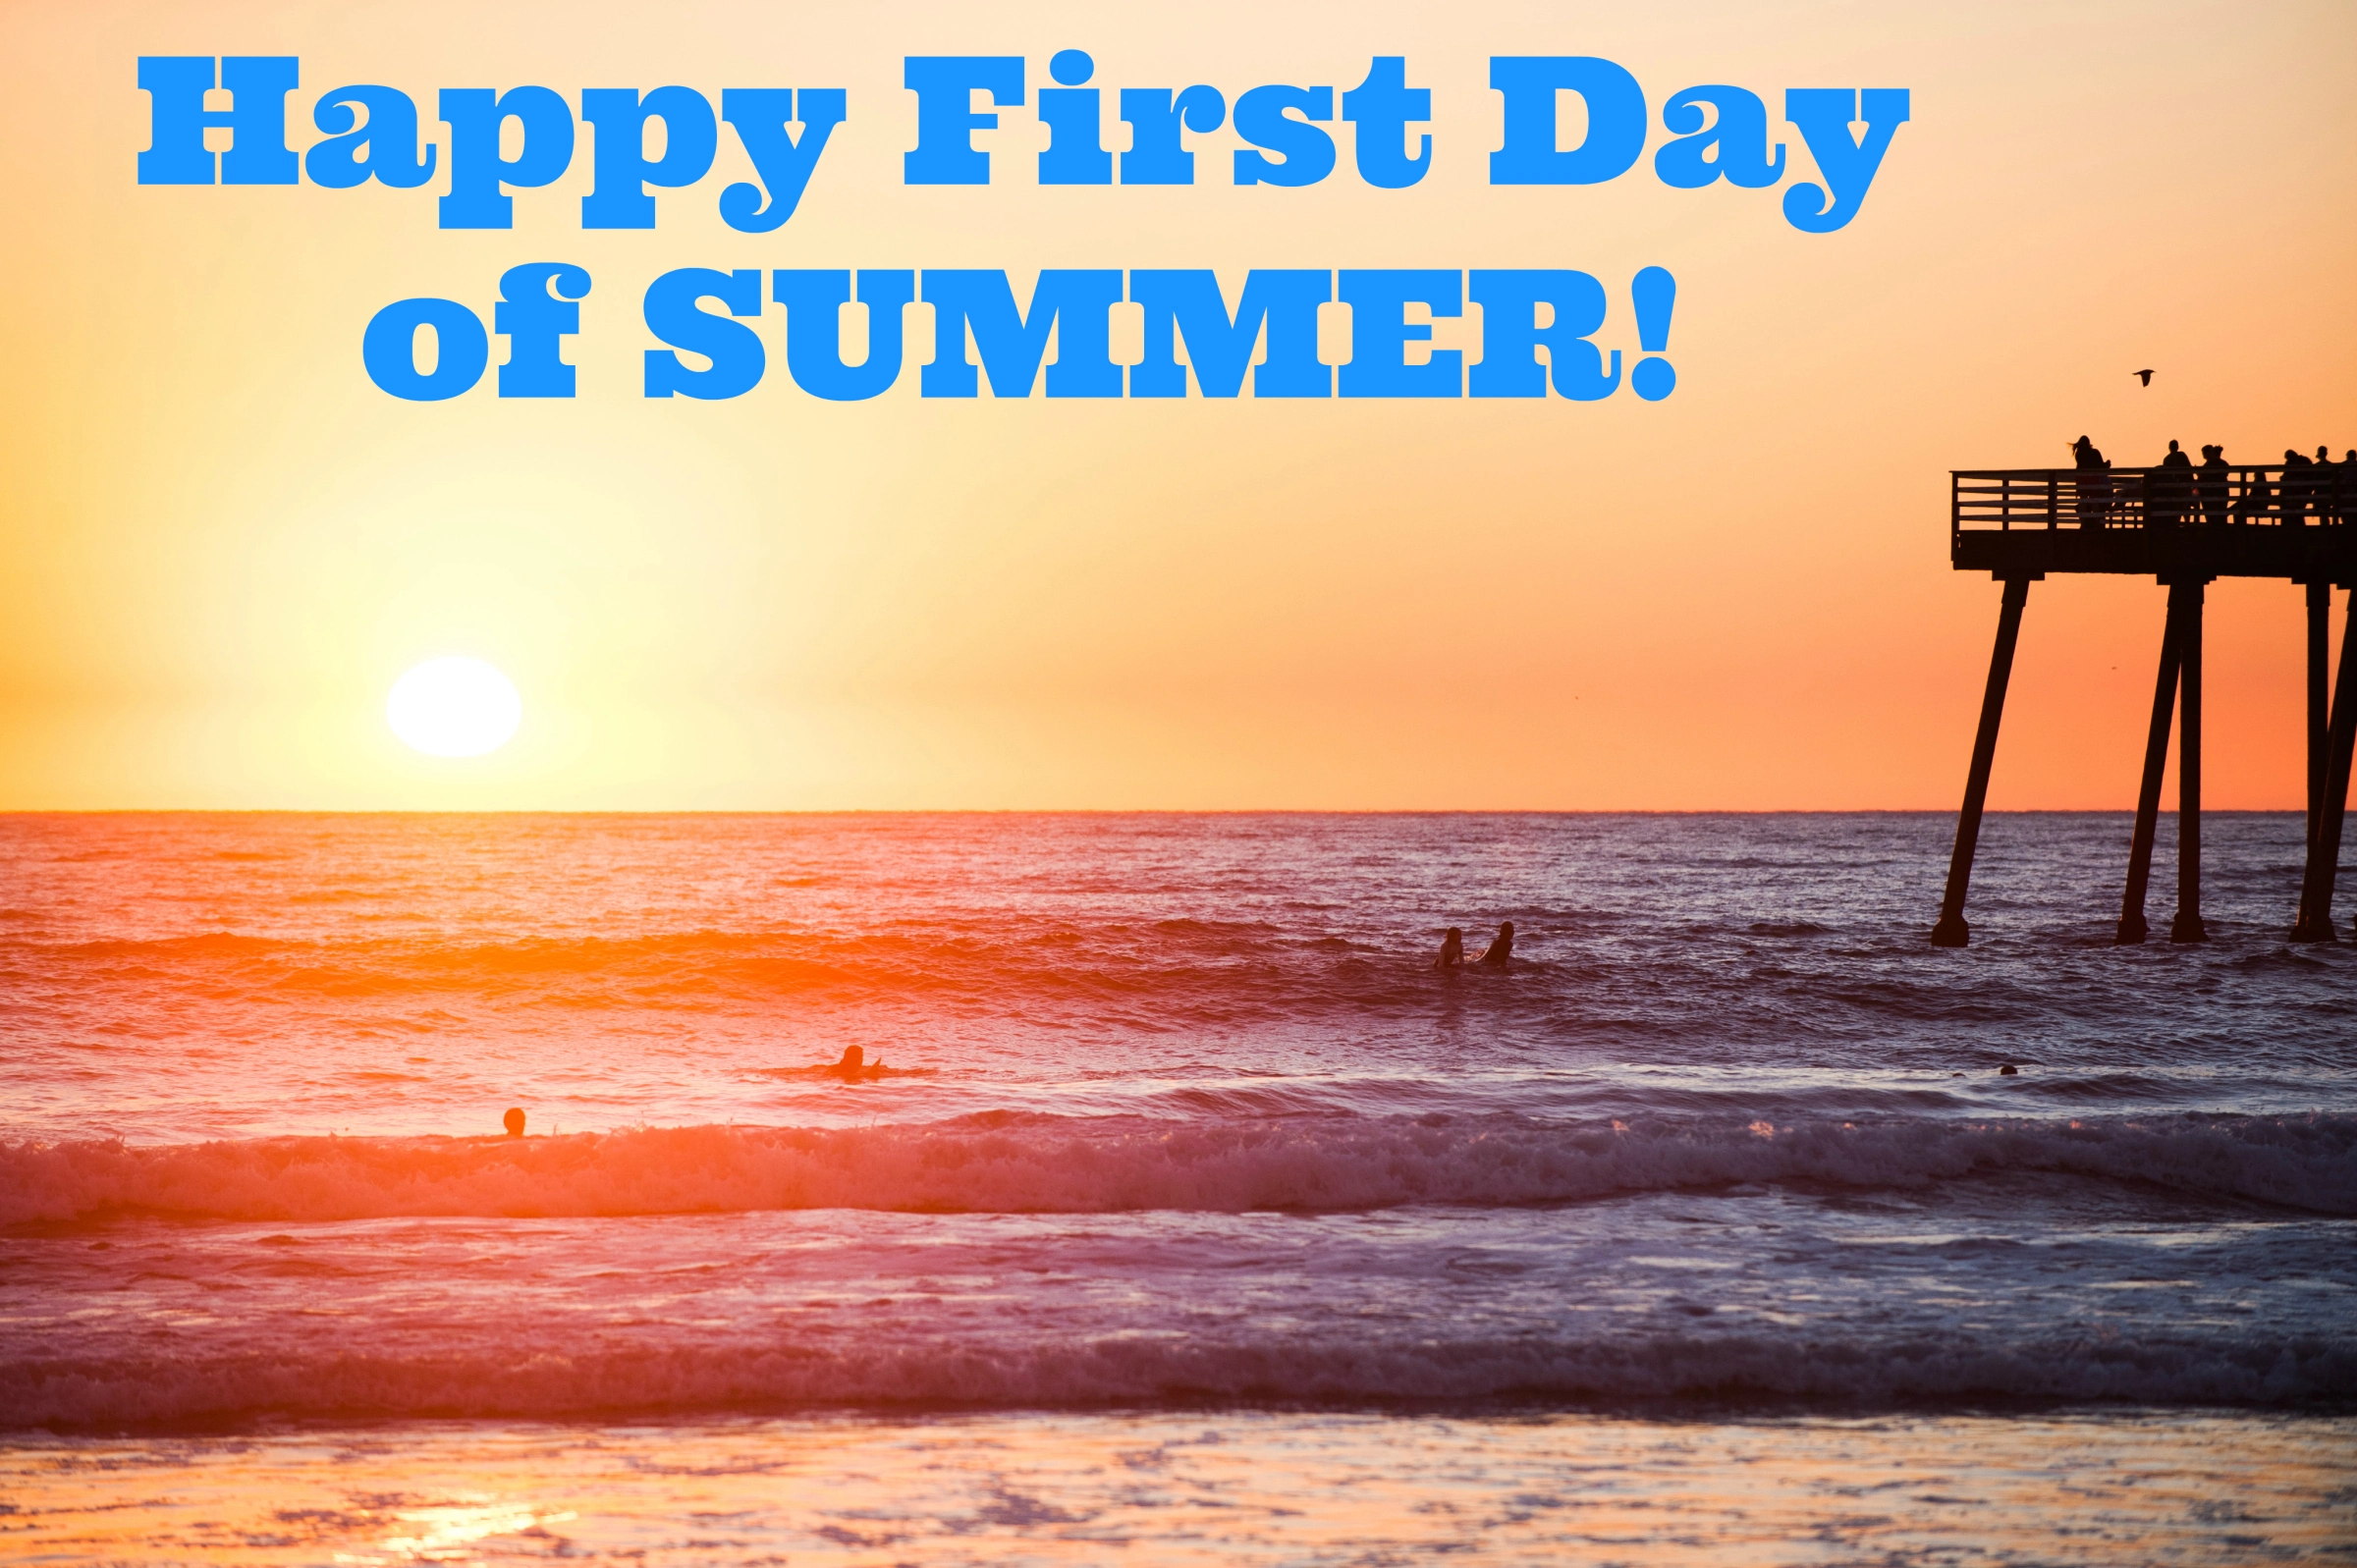 Happy First Day of Summer! A Measured Life